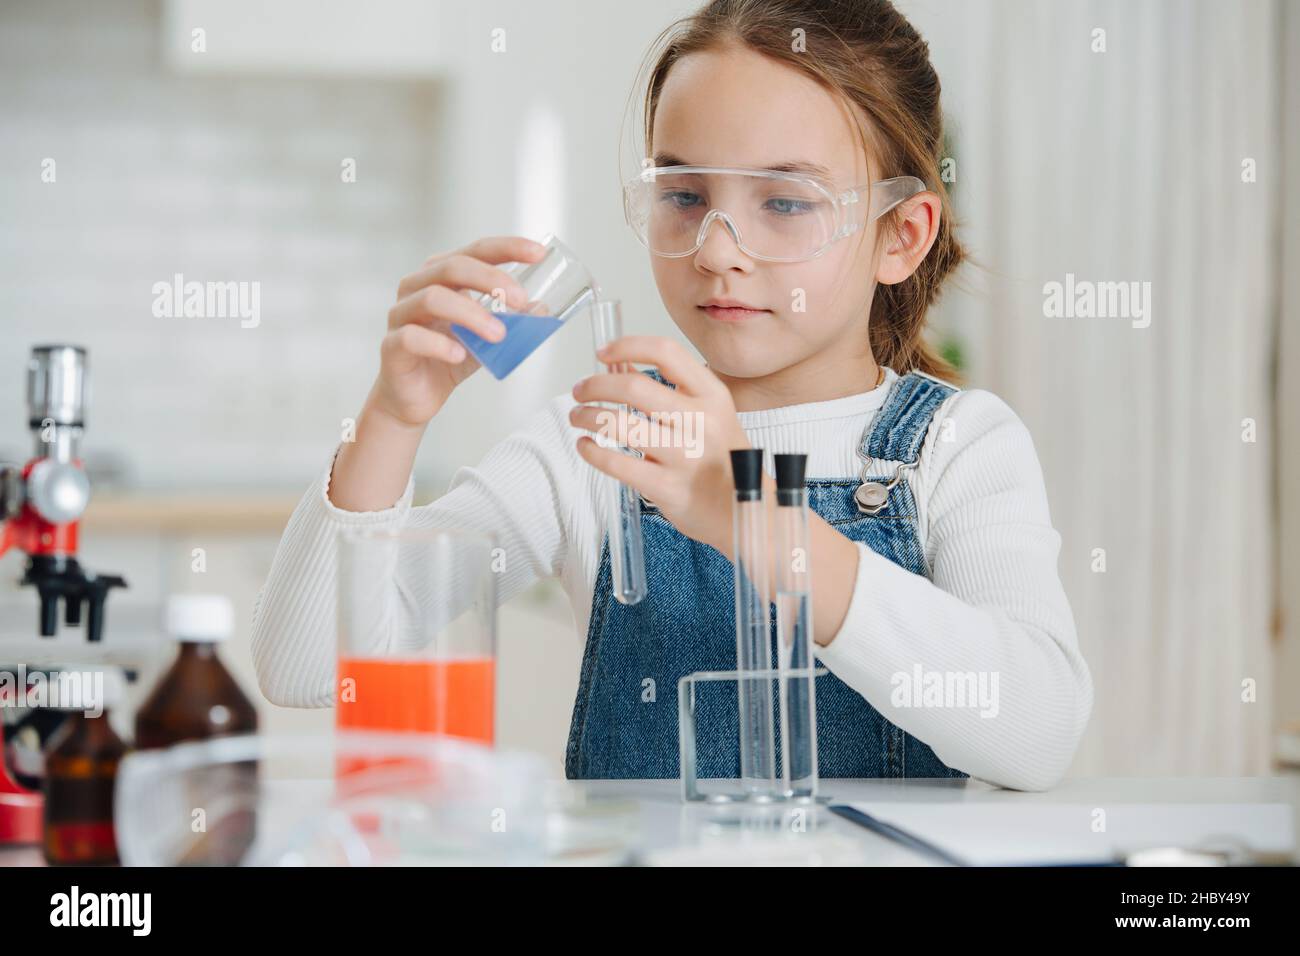 Cute focused girl doing home science project, pouring liquid into a flask. She is wearing plastic glasses and has glass chemical equipment and microsc Stock Photo